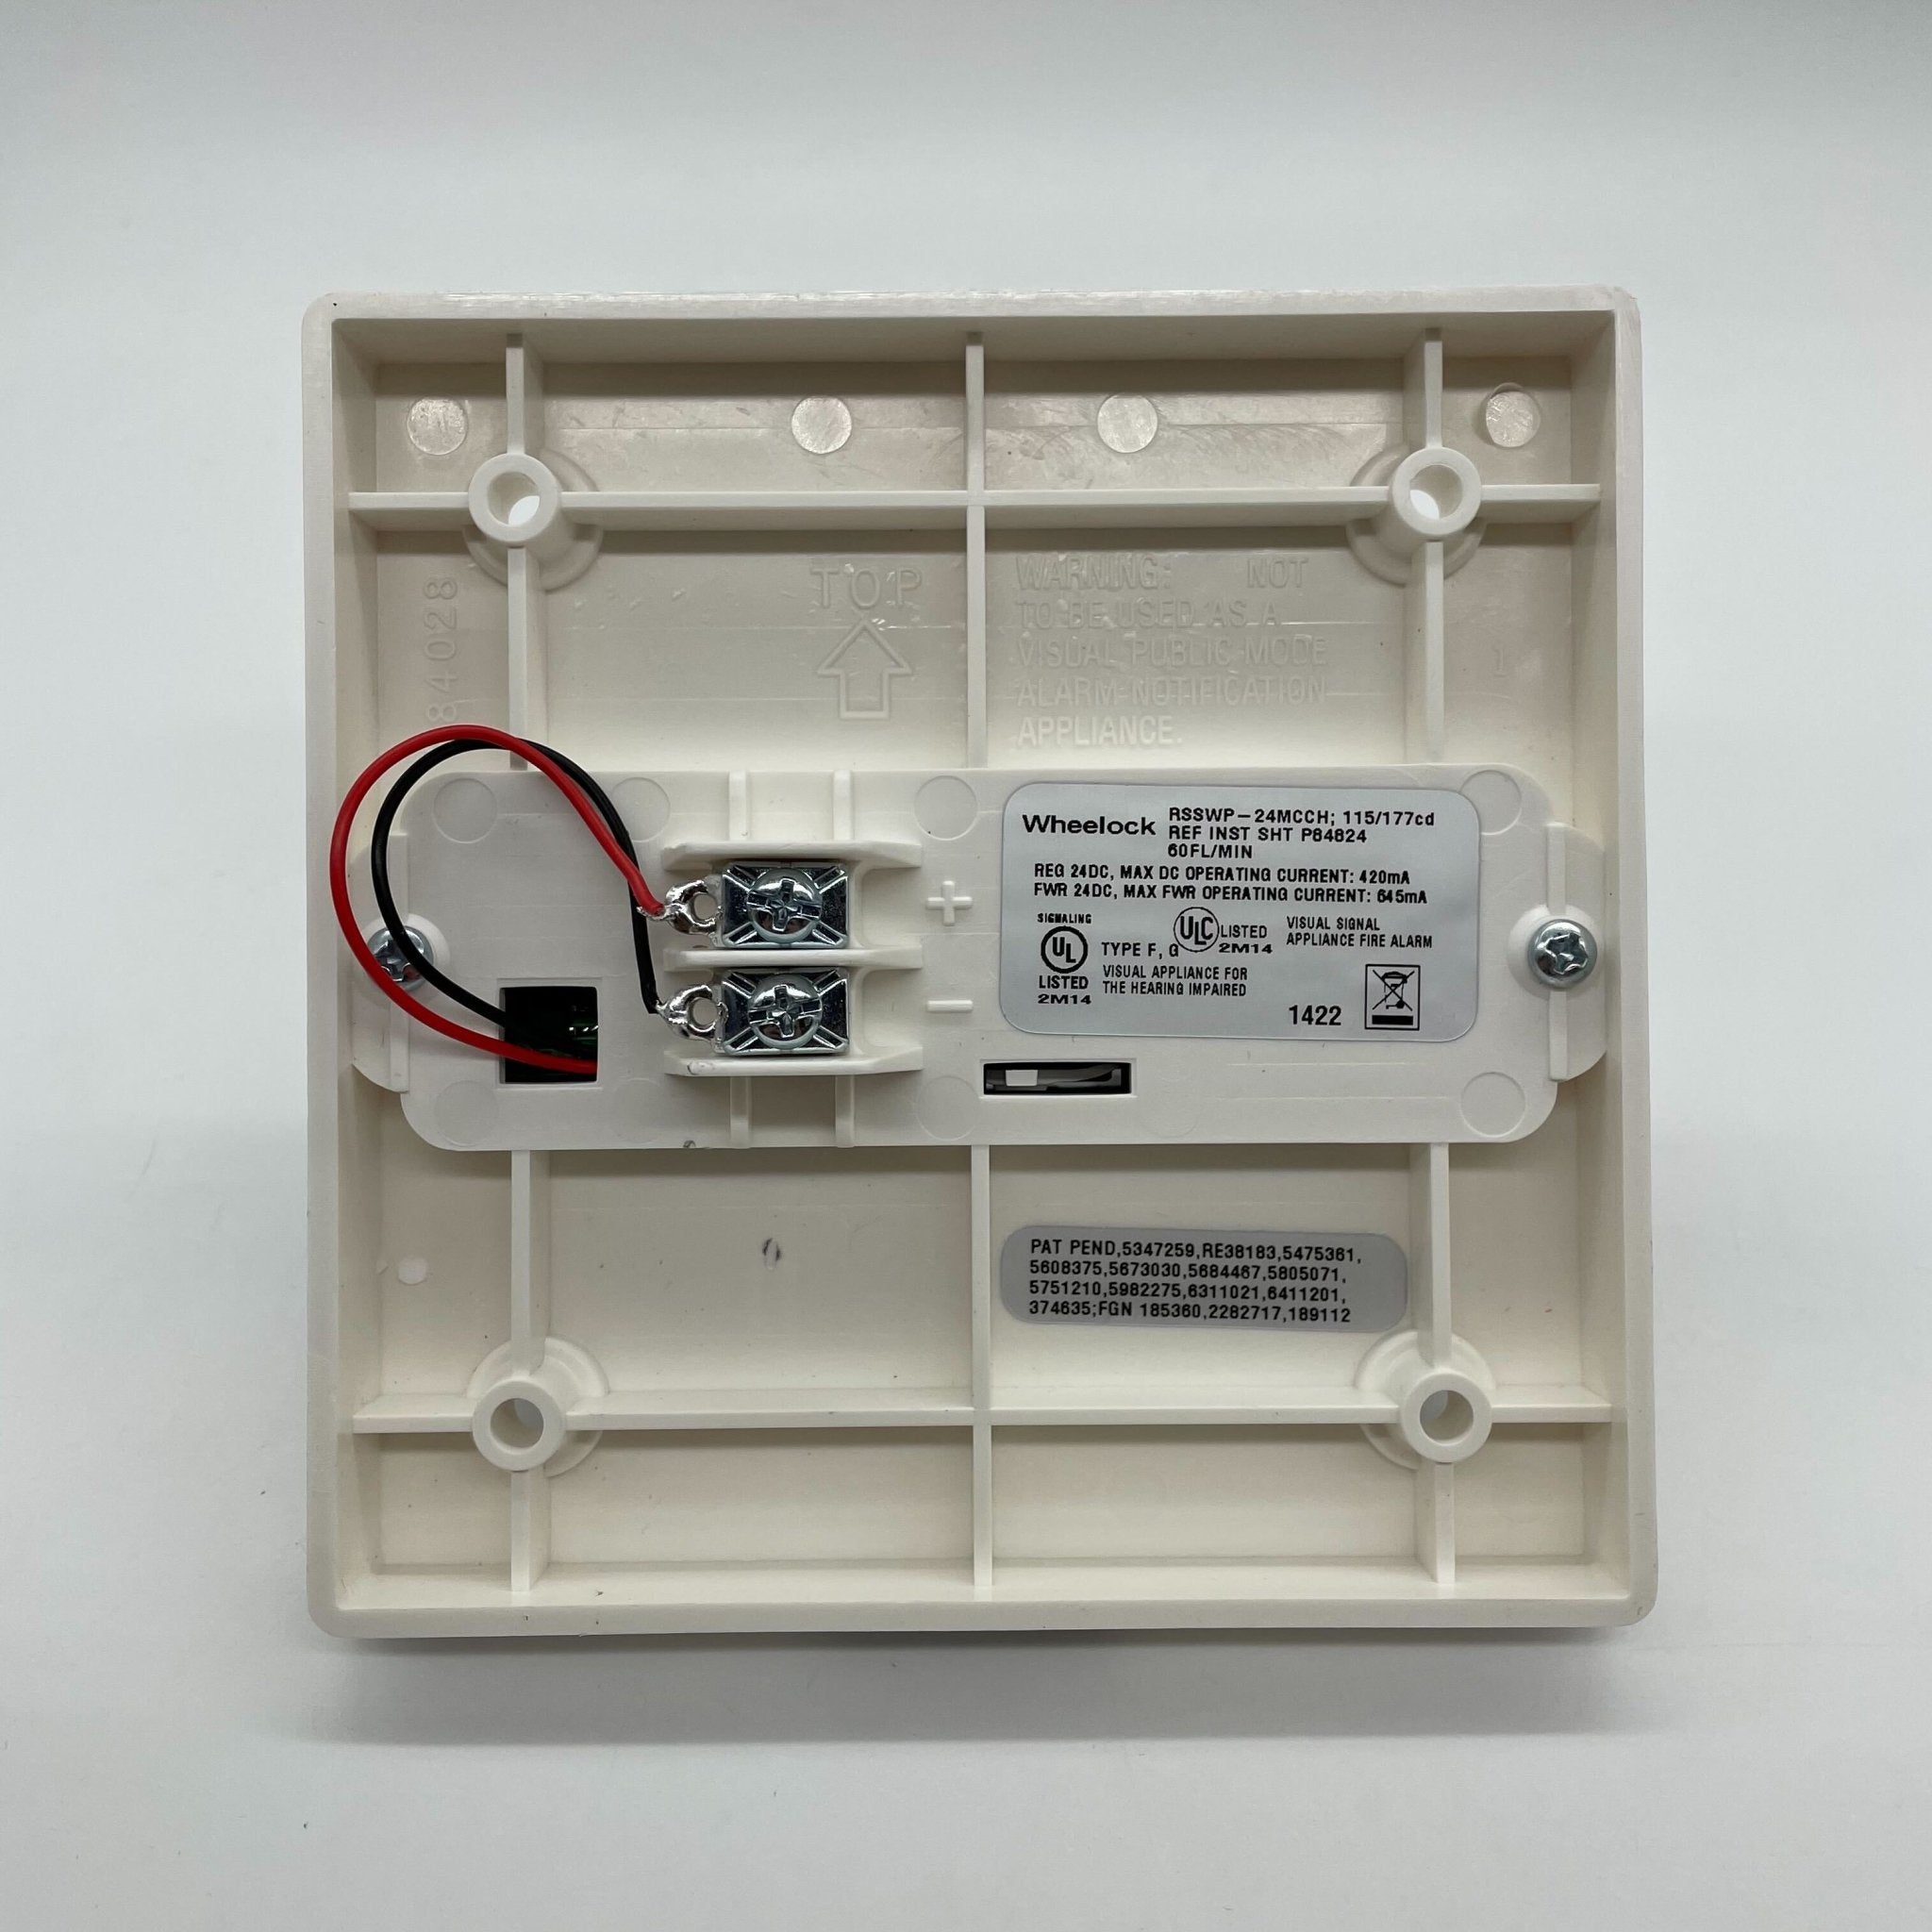 Wheelock RSSWP-24MCCH-FW - The Fire Alarm Supplier